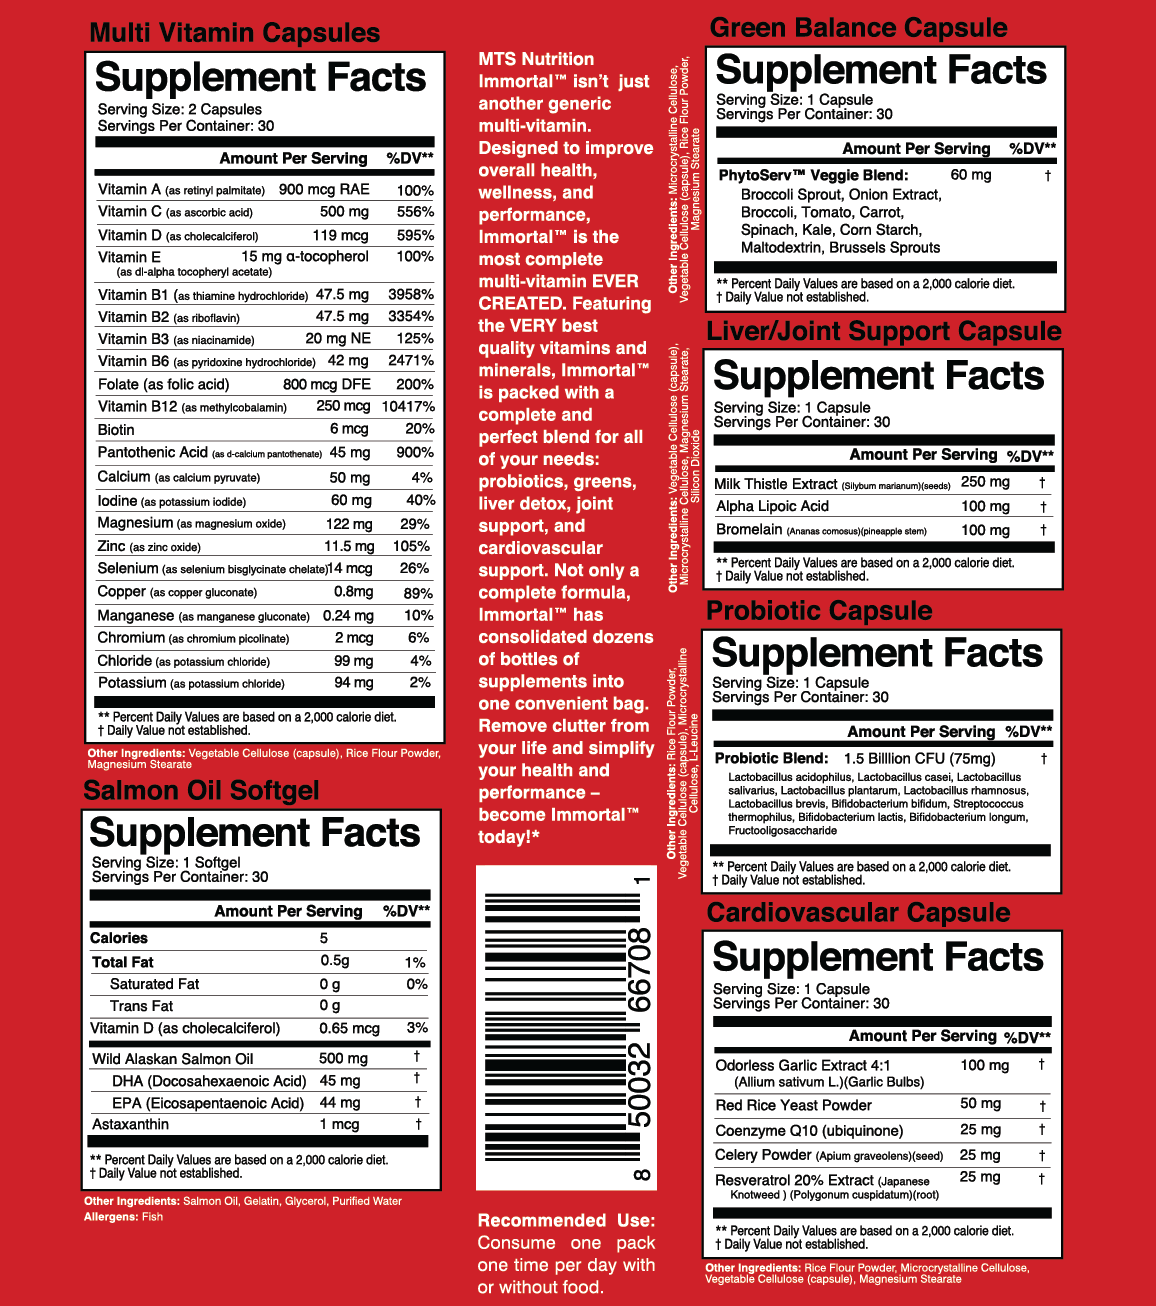 MTS Nutrition Immortal Supplement Facts 20203